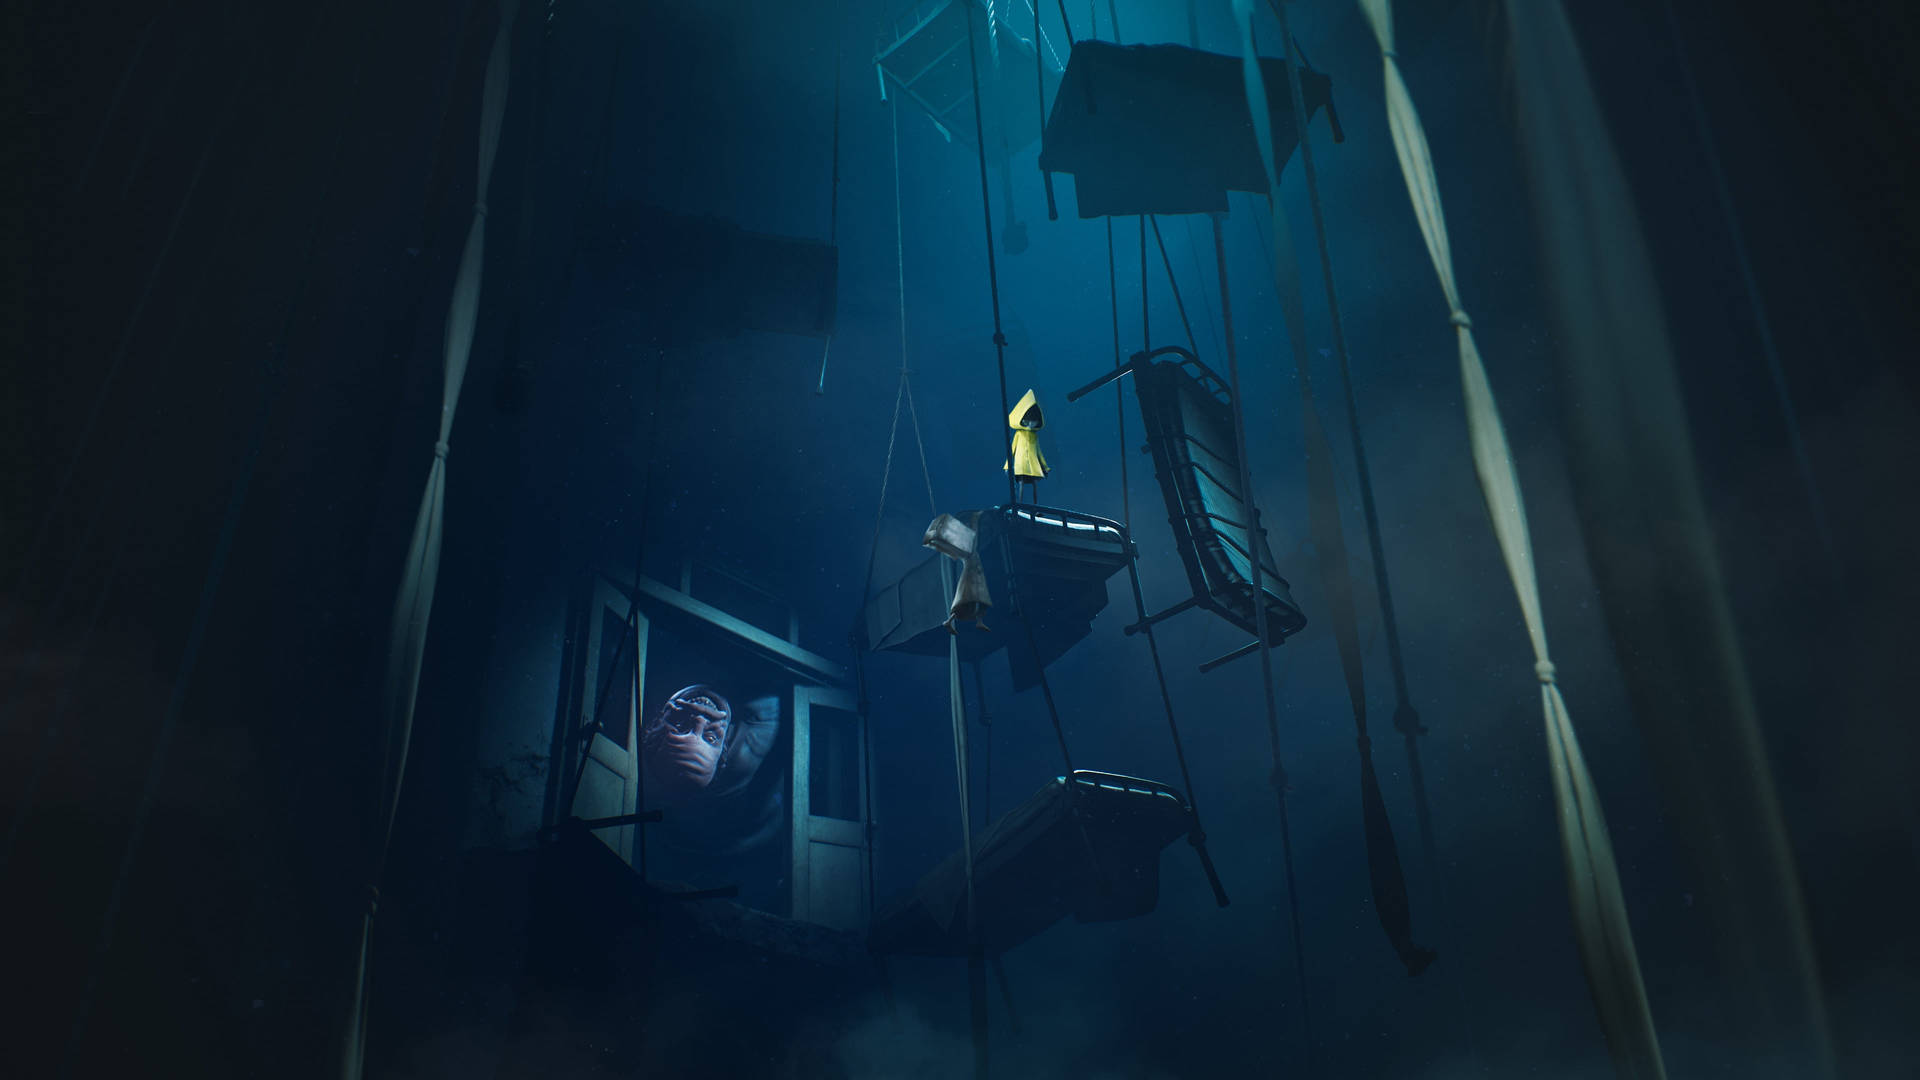 Little Nightmares 3840X2160 Wallpaper and Background Image